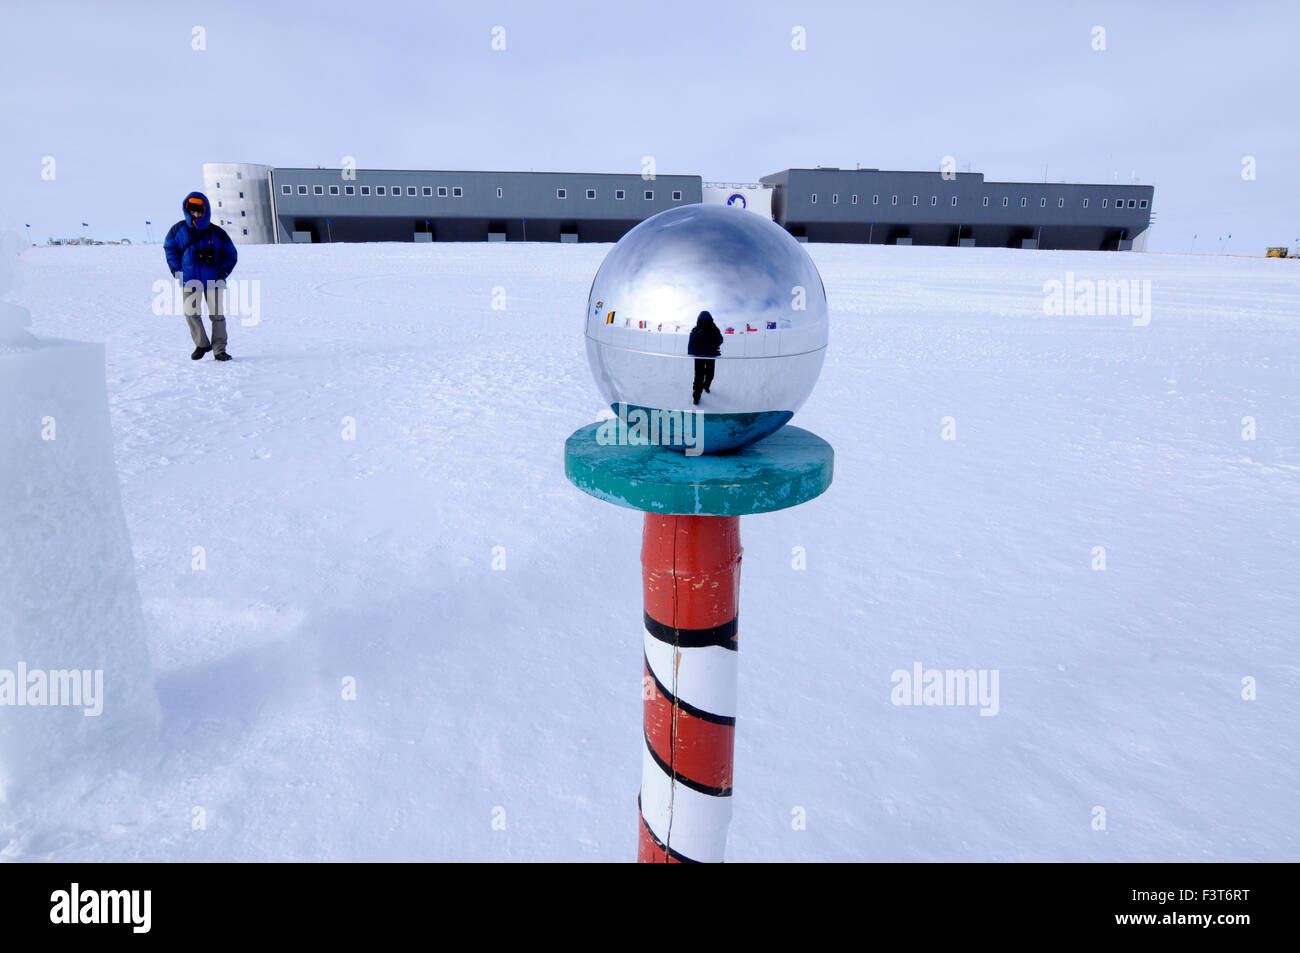 A scientist at the South Pole with Amundsen-Scott South Pole Station behind the mirror ball at the ceremonial pole Stock Photo